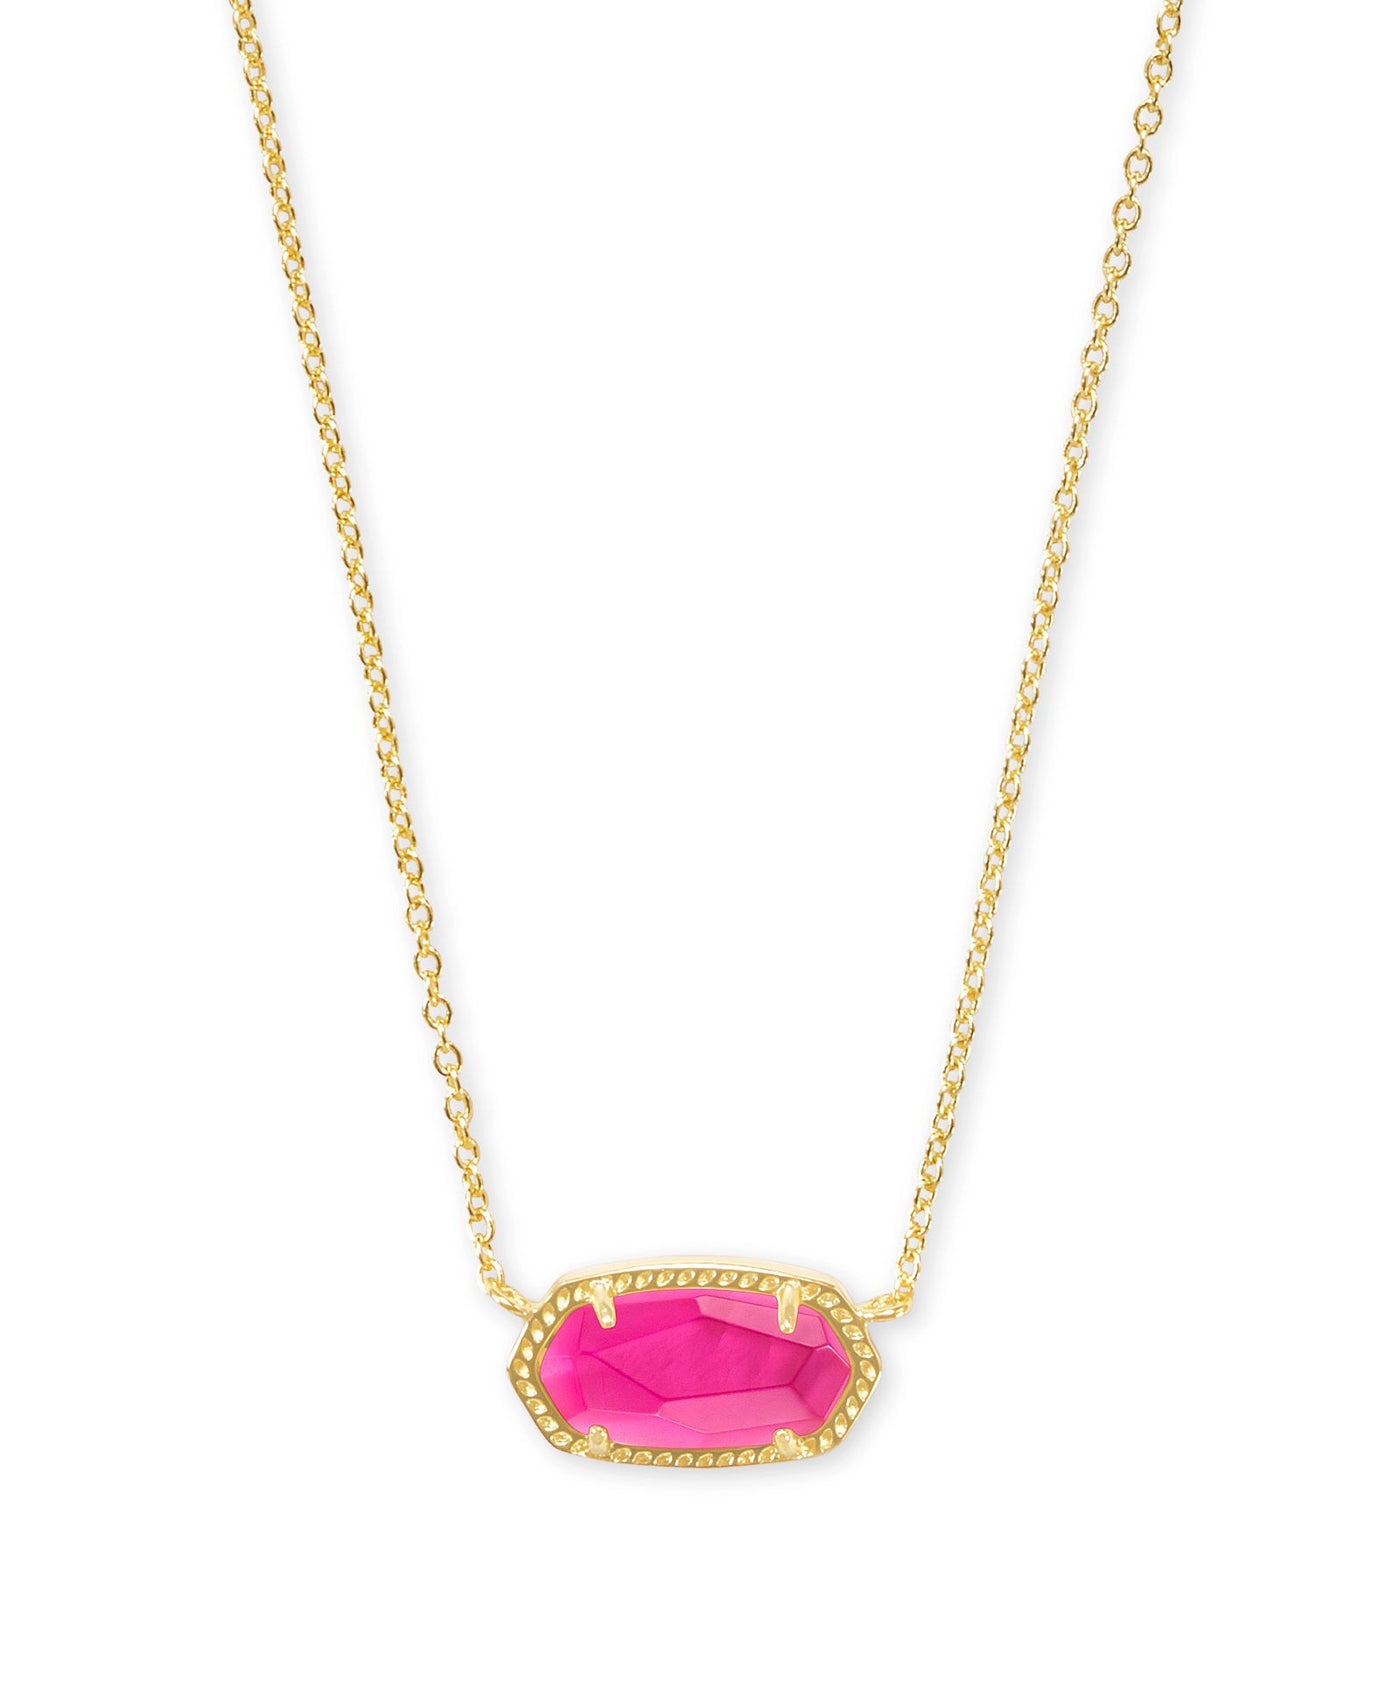 Kendra Scott Elisa Gold Pendant Necklace in Azalea Illusion-Necklaces-Kendra Scott-Market Street Nest, Fashionable Clothing, Shoes and Home Décor Located in Mabank, TX